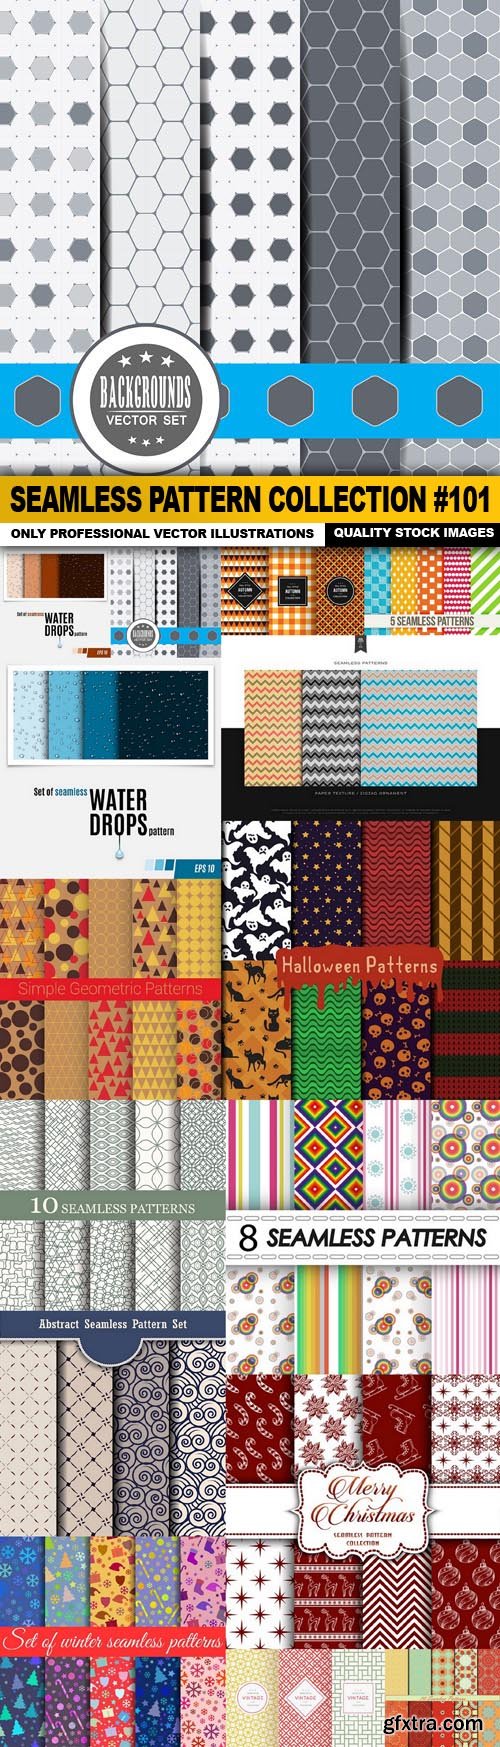 Seamless Pattern Collection #101 - 15 Vector